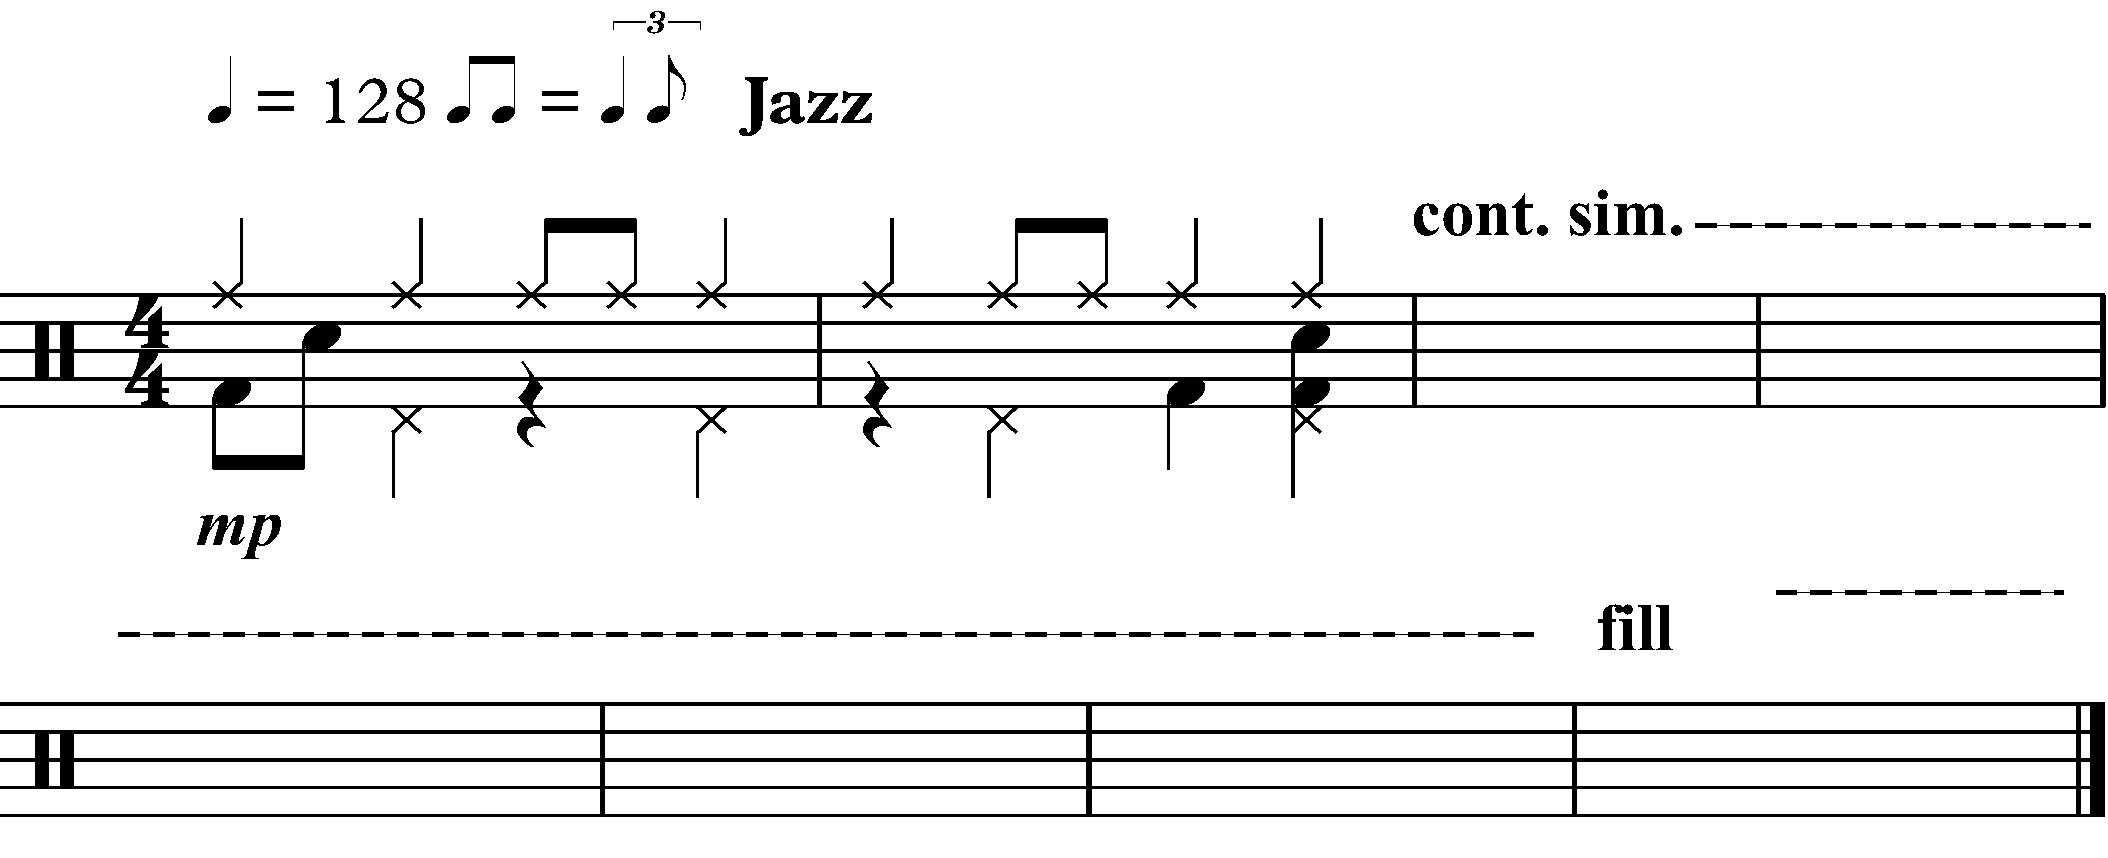 The sheet music for the exercise